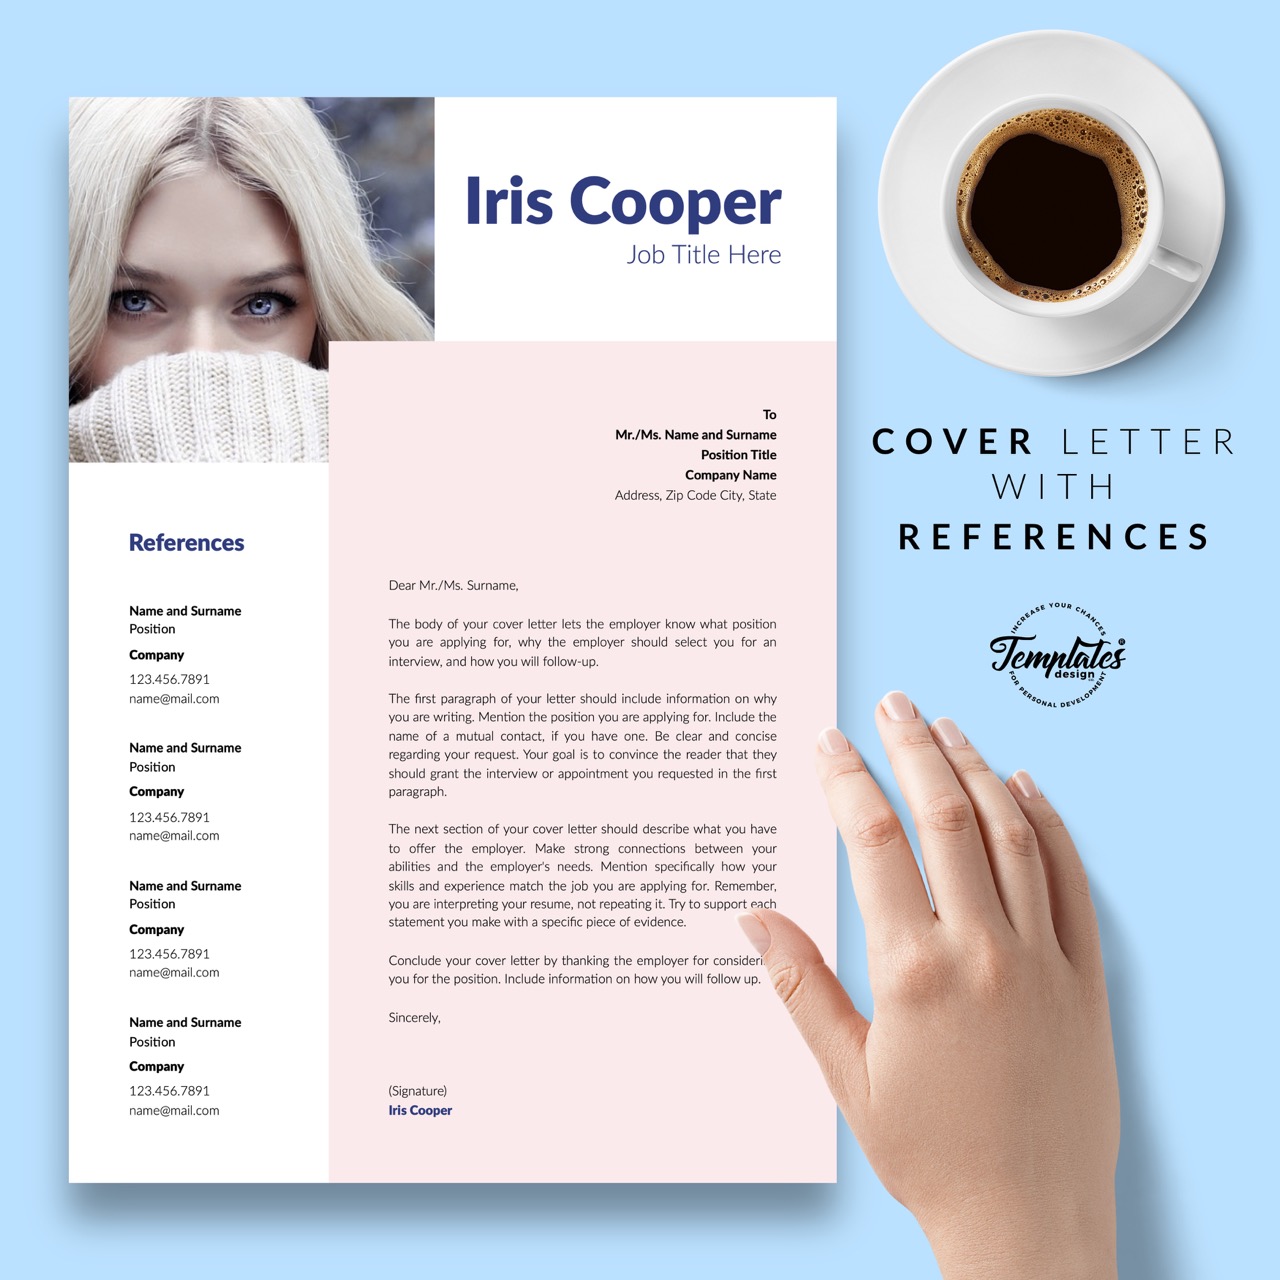 Person's hand next to a coffee cup and a pink cover letter.